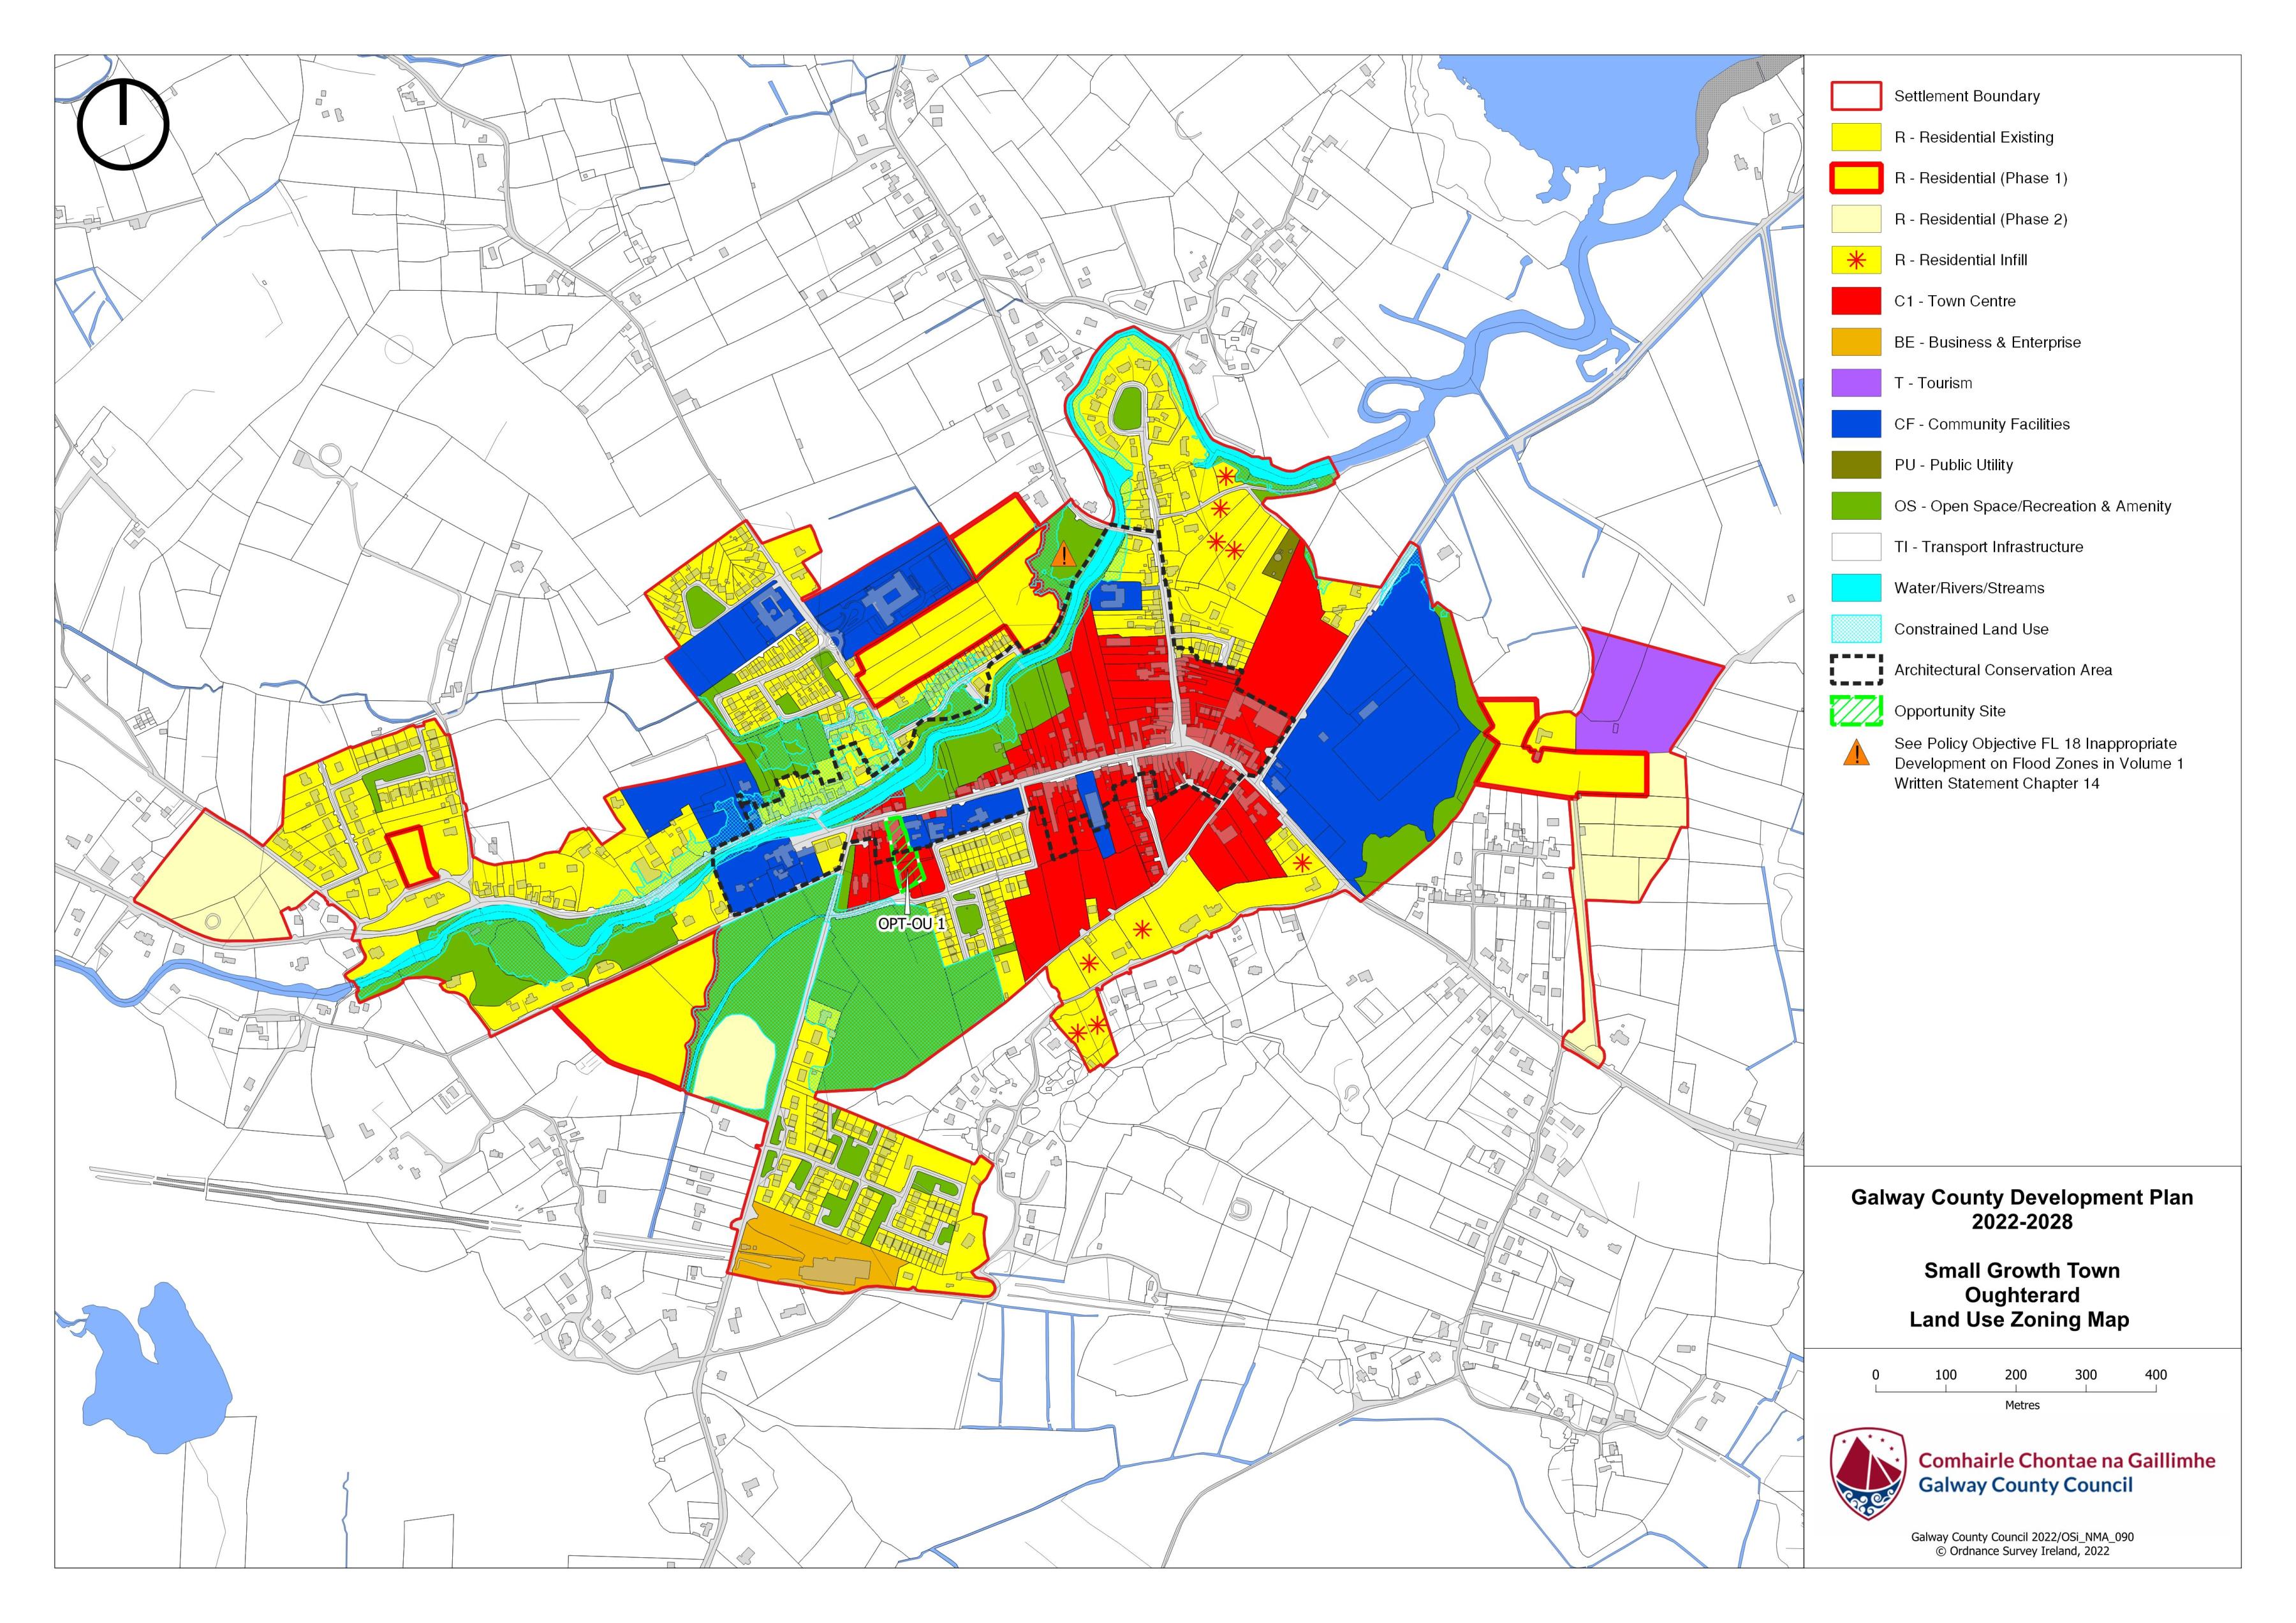 Oughterard Land Use Zoning Map